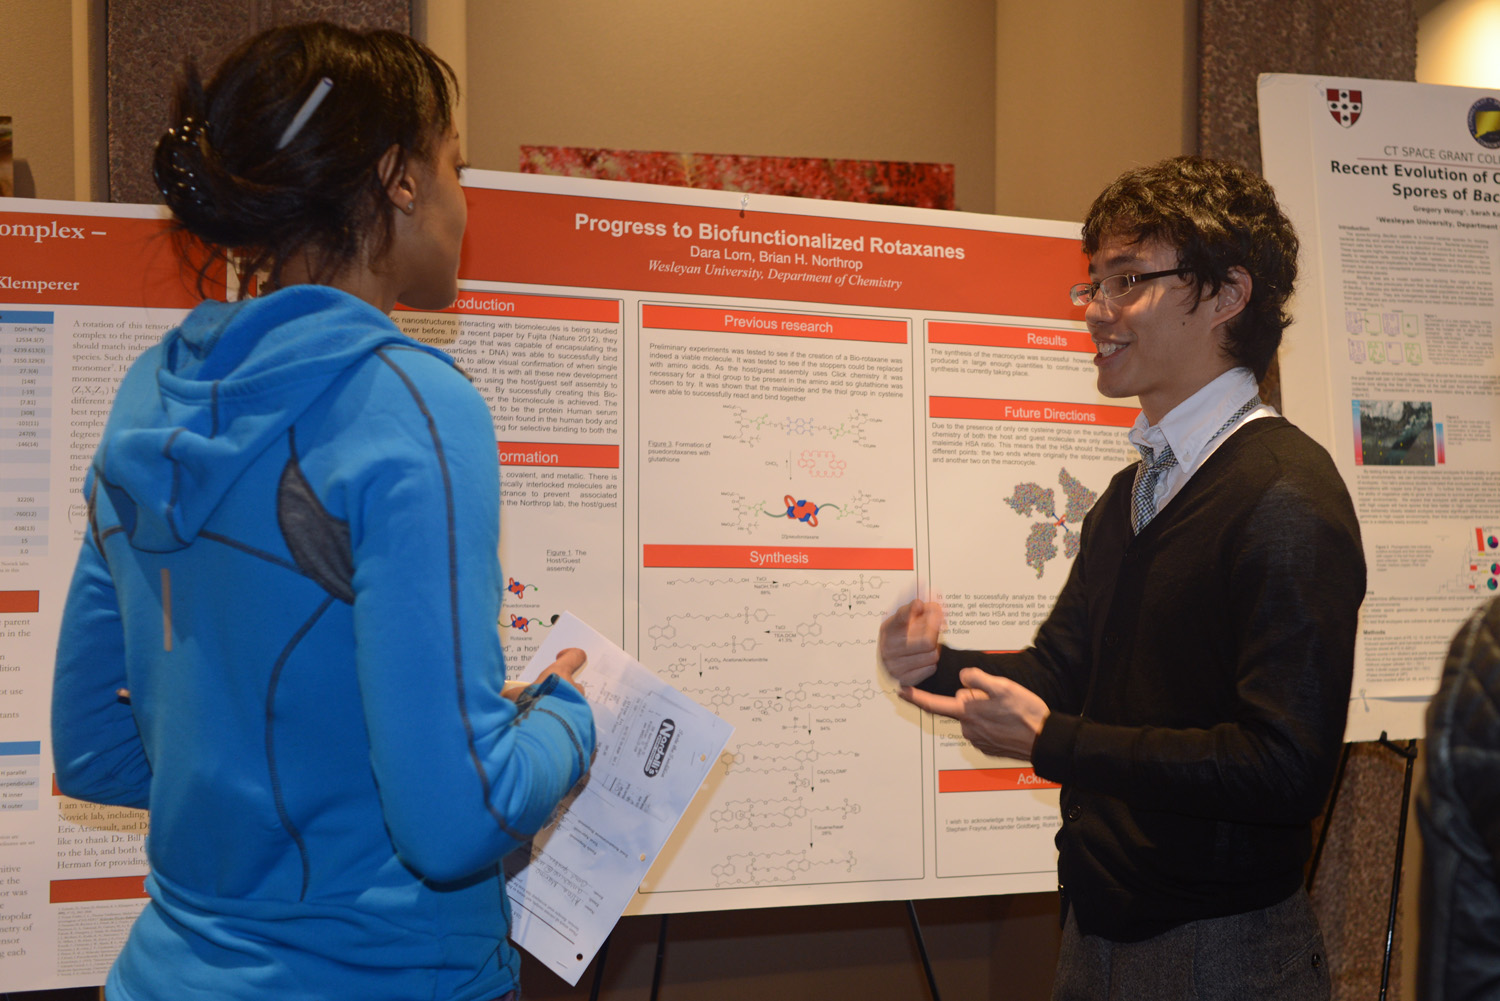 Dara Lorn '15 discussed his research, "Progress to Biofunctionalized Rotaxanes."